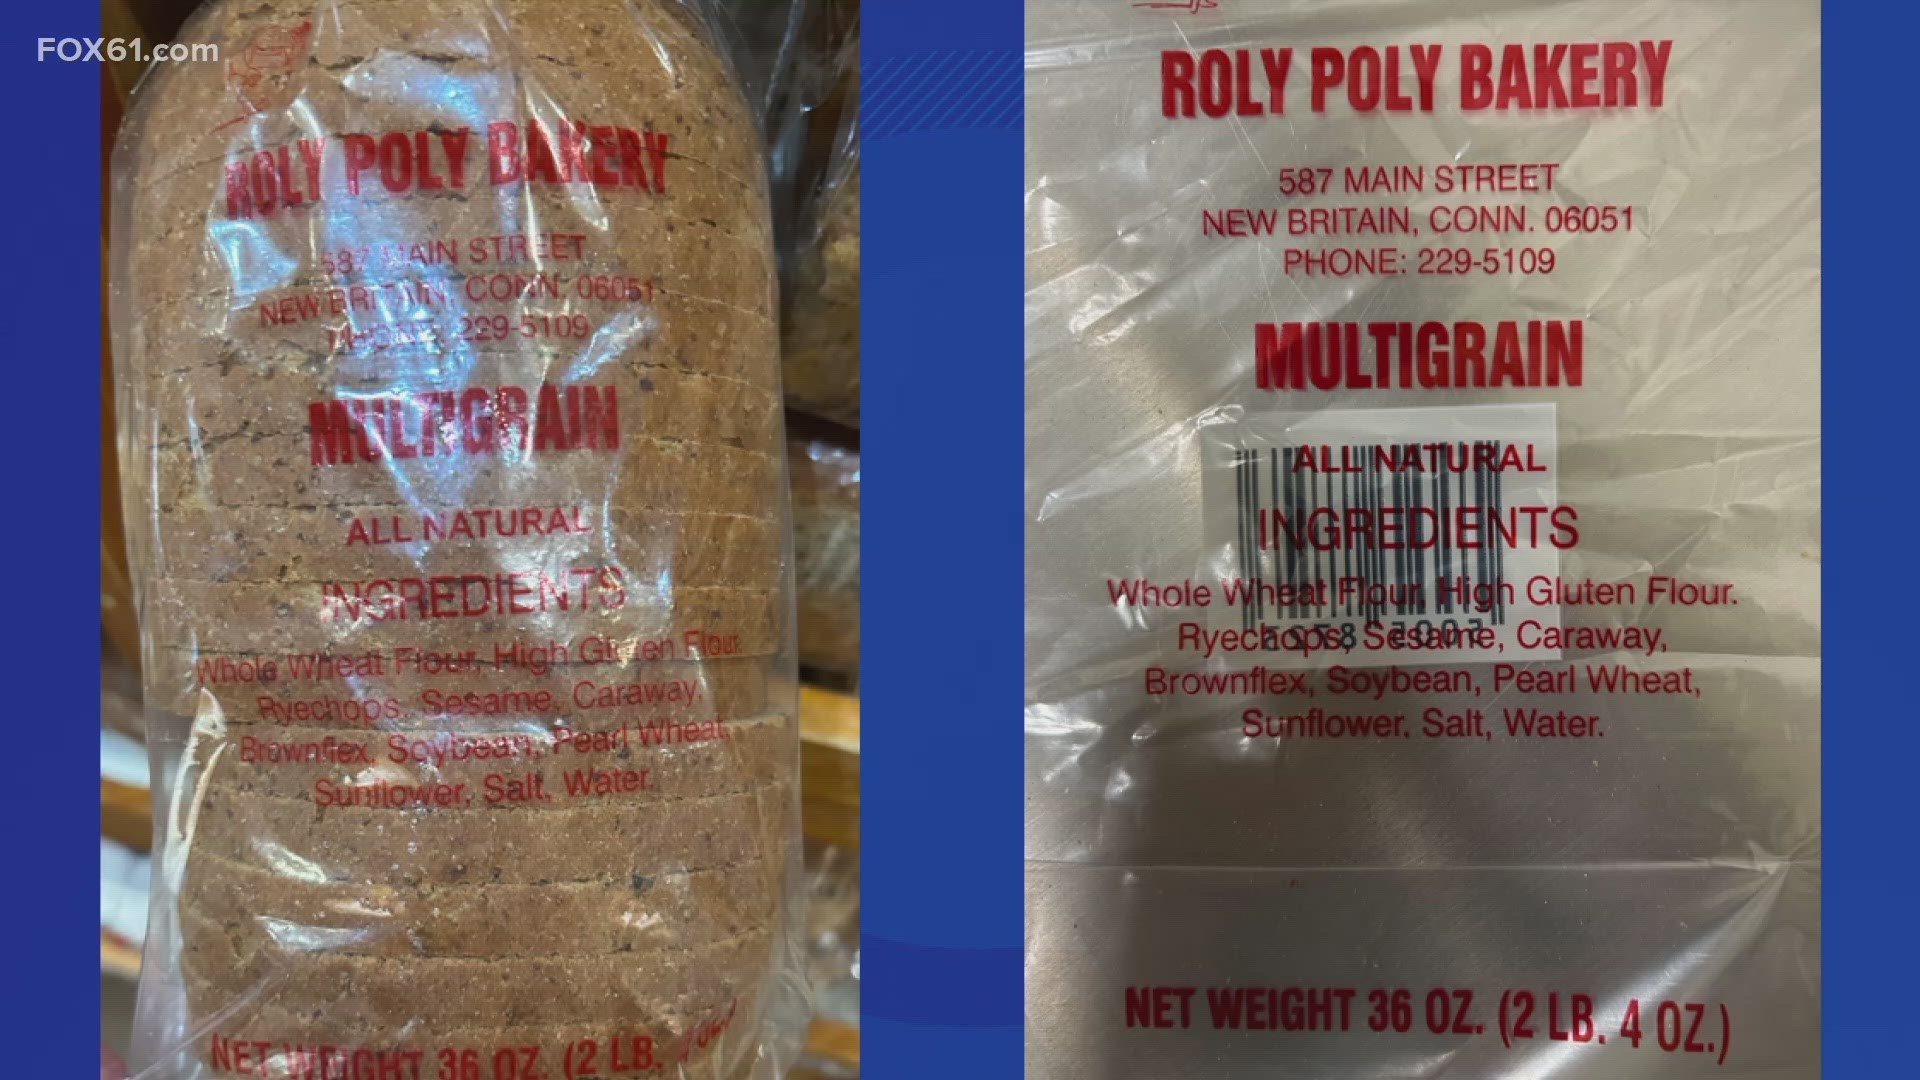 The affected product is the 20 oz. loaves of Roly Poly Bakery multigrain bread, which were sold before April 11.